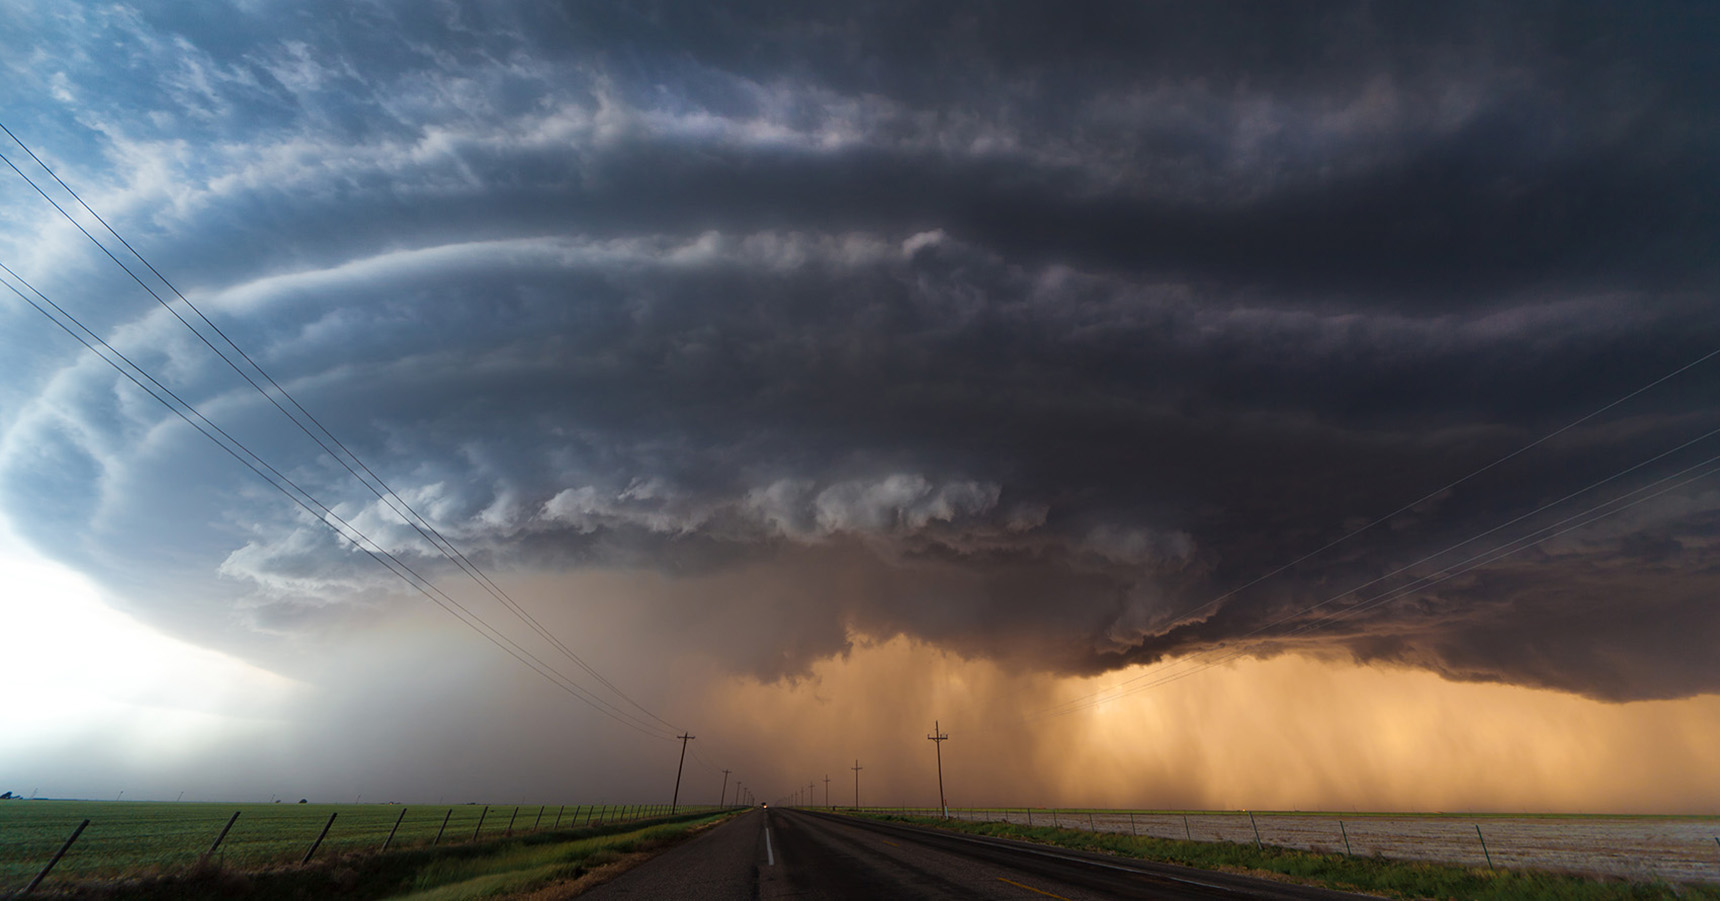 Supercell thunderstorm in the American Plains.